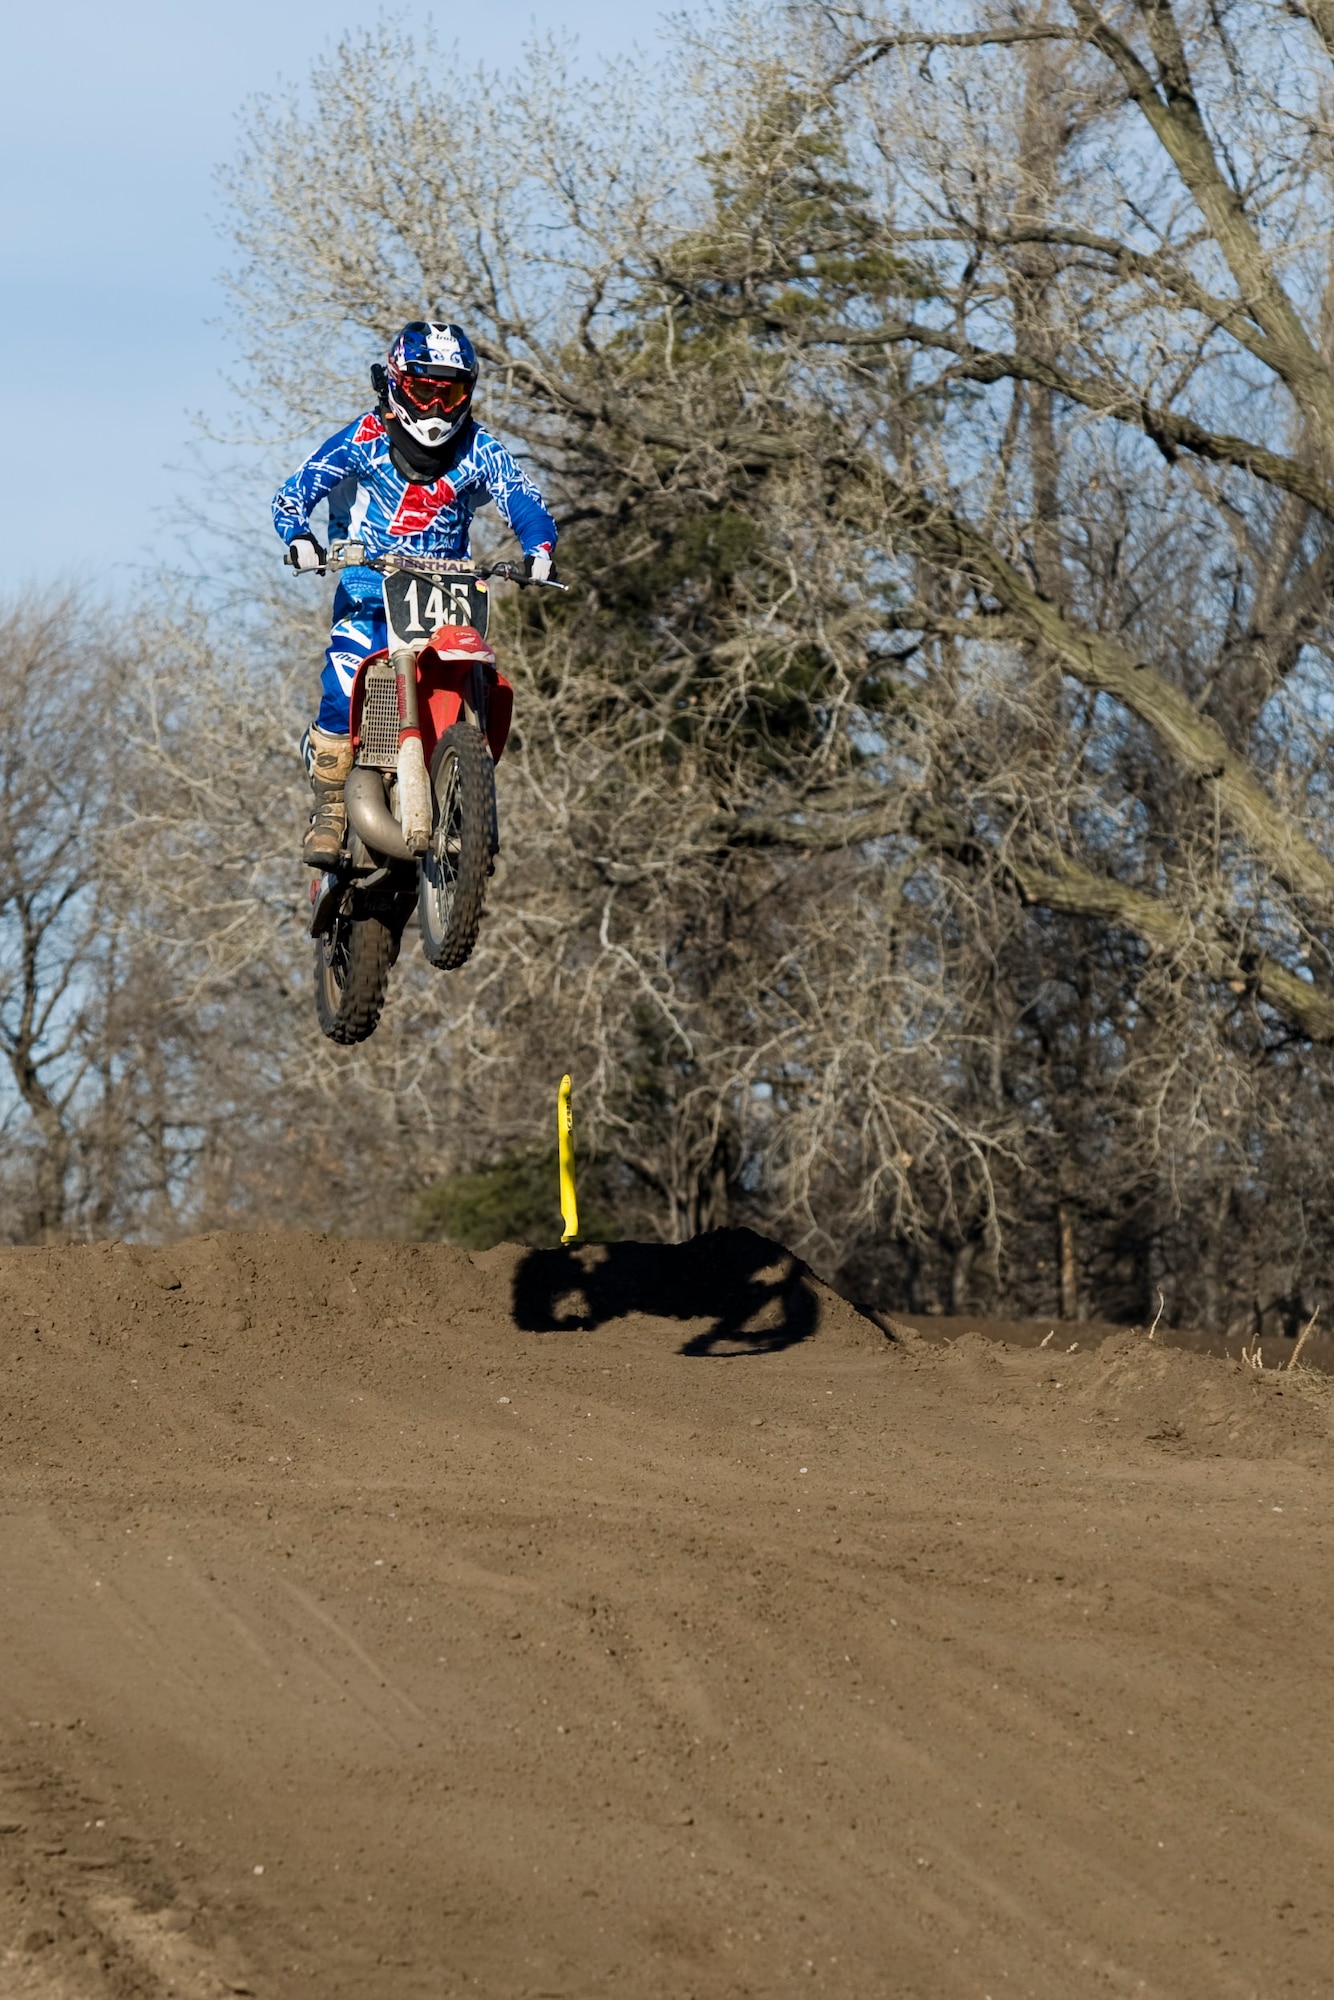 2nd Lt. Michael Reardon jumps on his dirt bike, Dec. 15, 2013, during a race in Maize, Kan. Reardon is the deputy chief of program development with the 22nd Civil Engineer Squadron at McConnell Air Force Base, Kan. Motocross is one of many outdoor activities Reardon engages himself in, including: snowboarding, competitive pistol shooting and team sports. 